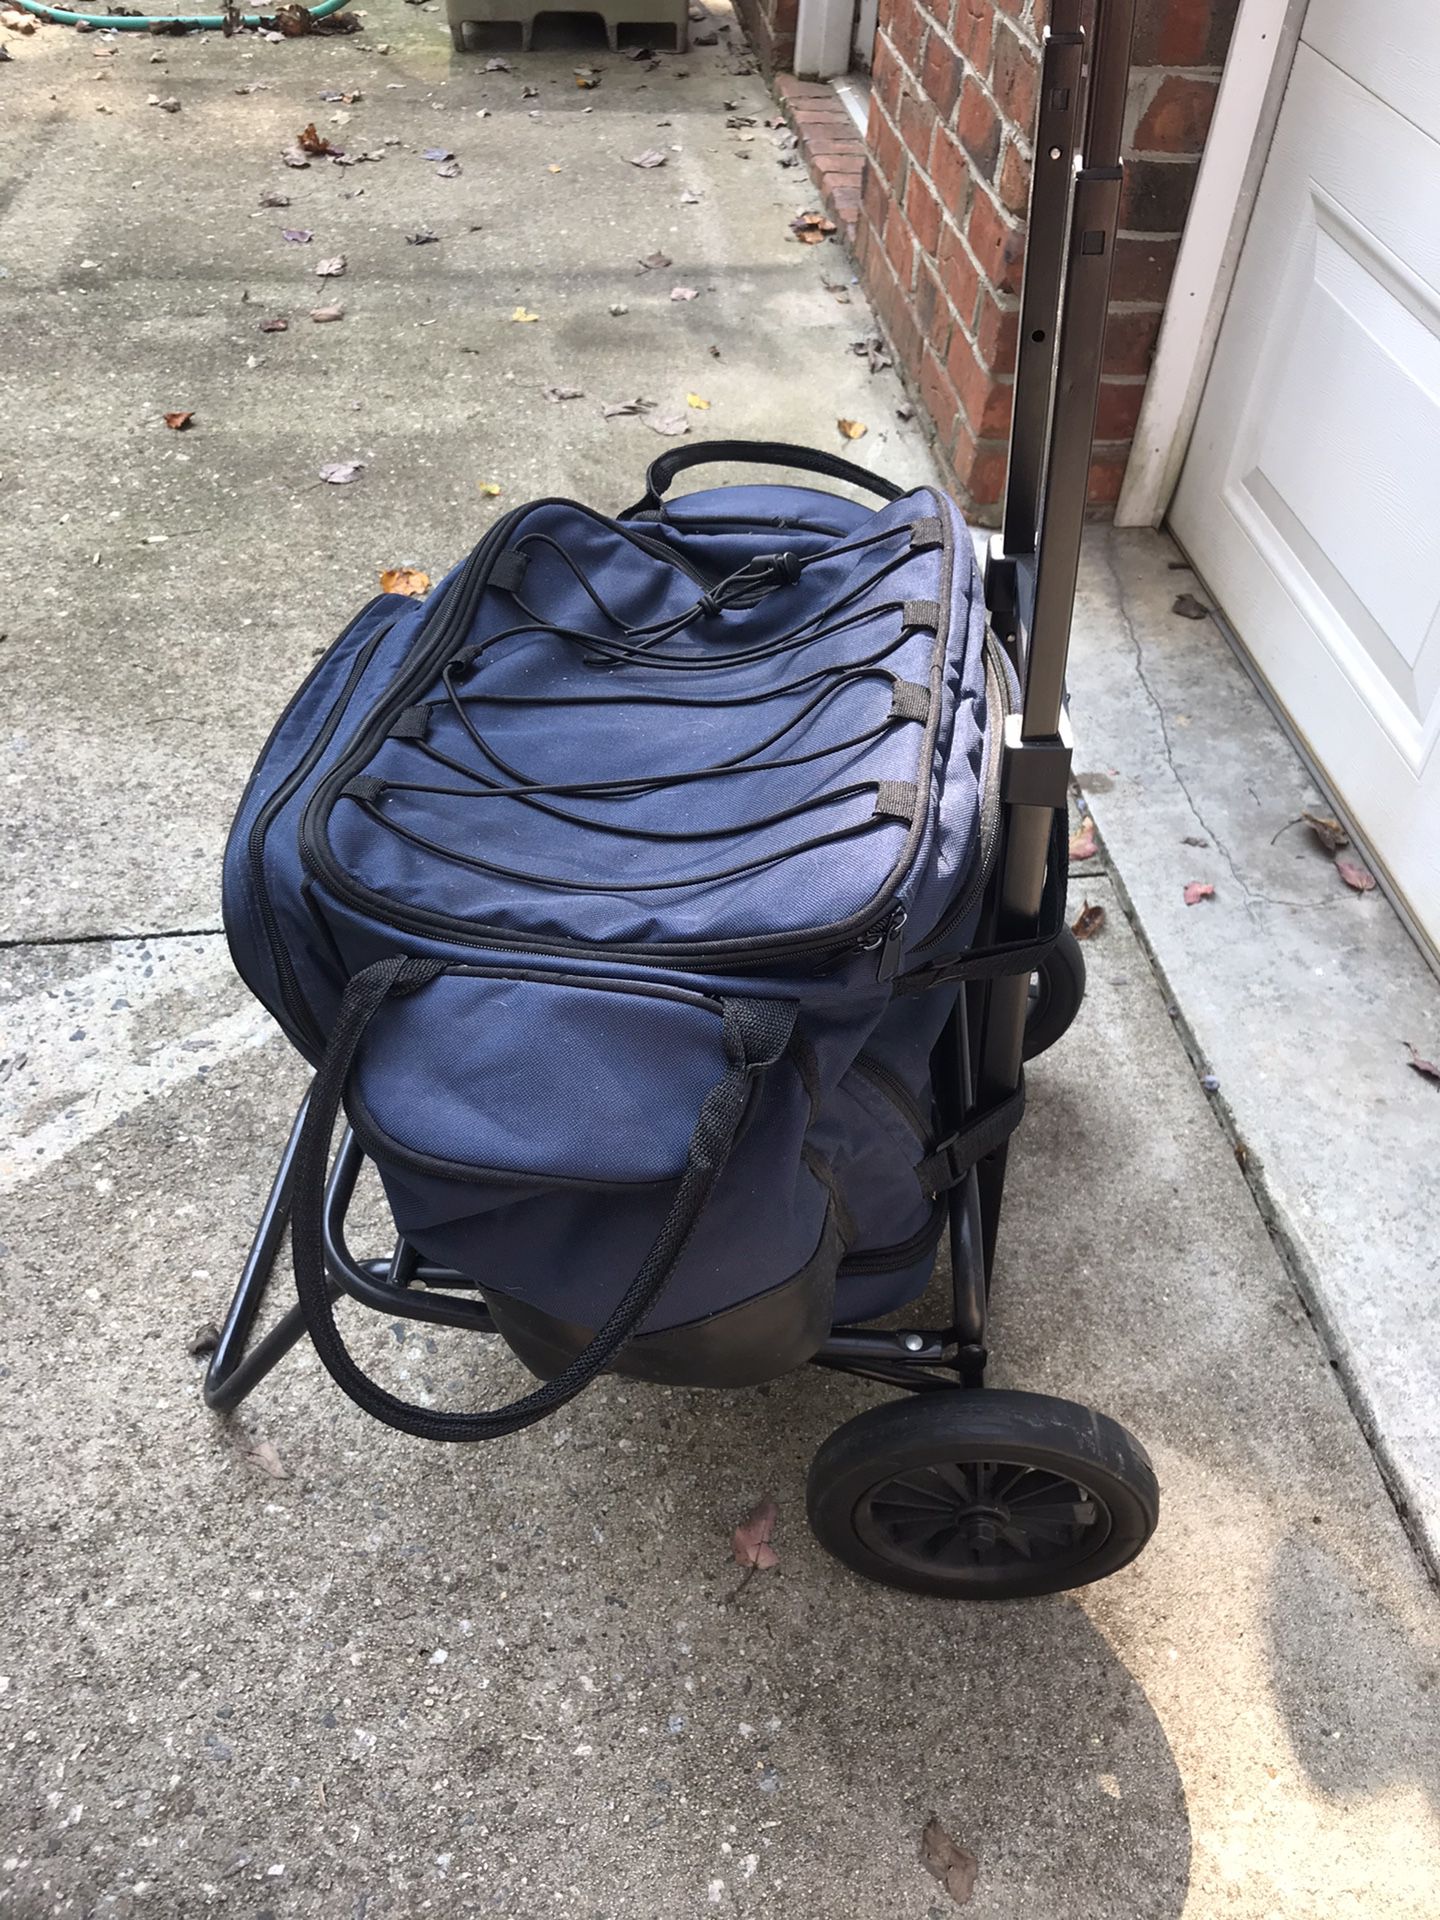 Insulated Cooler/Picnic Basket on Wheels